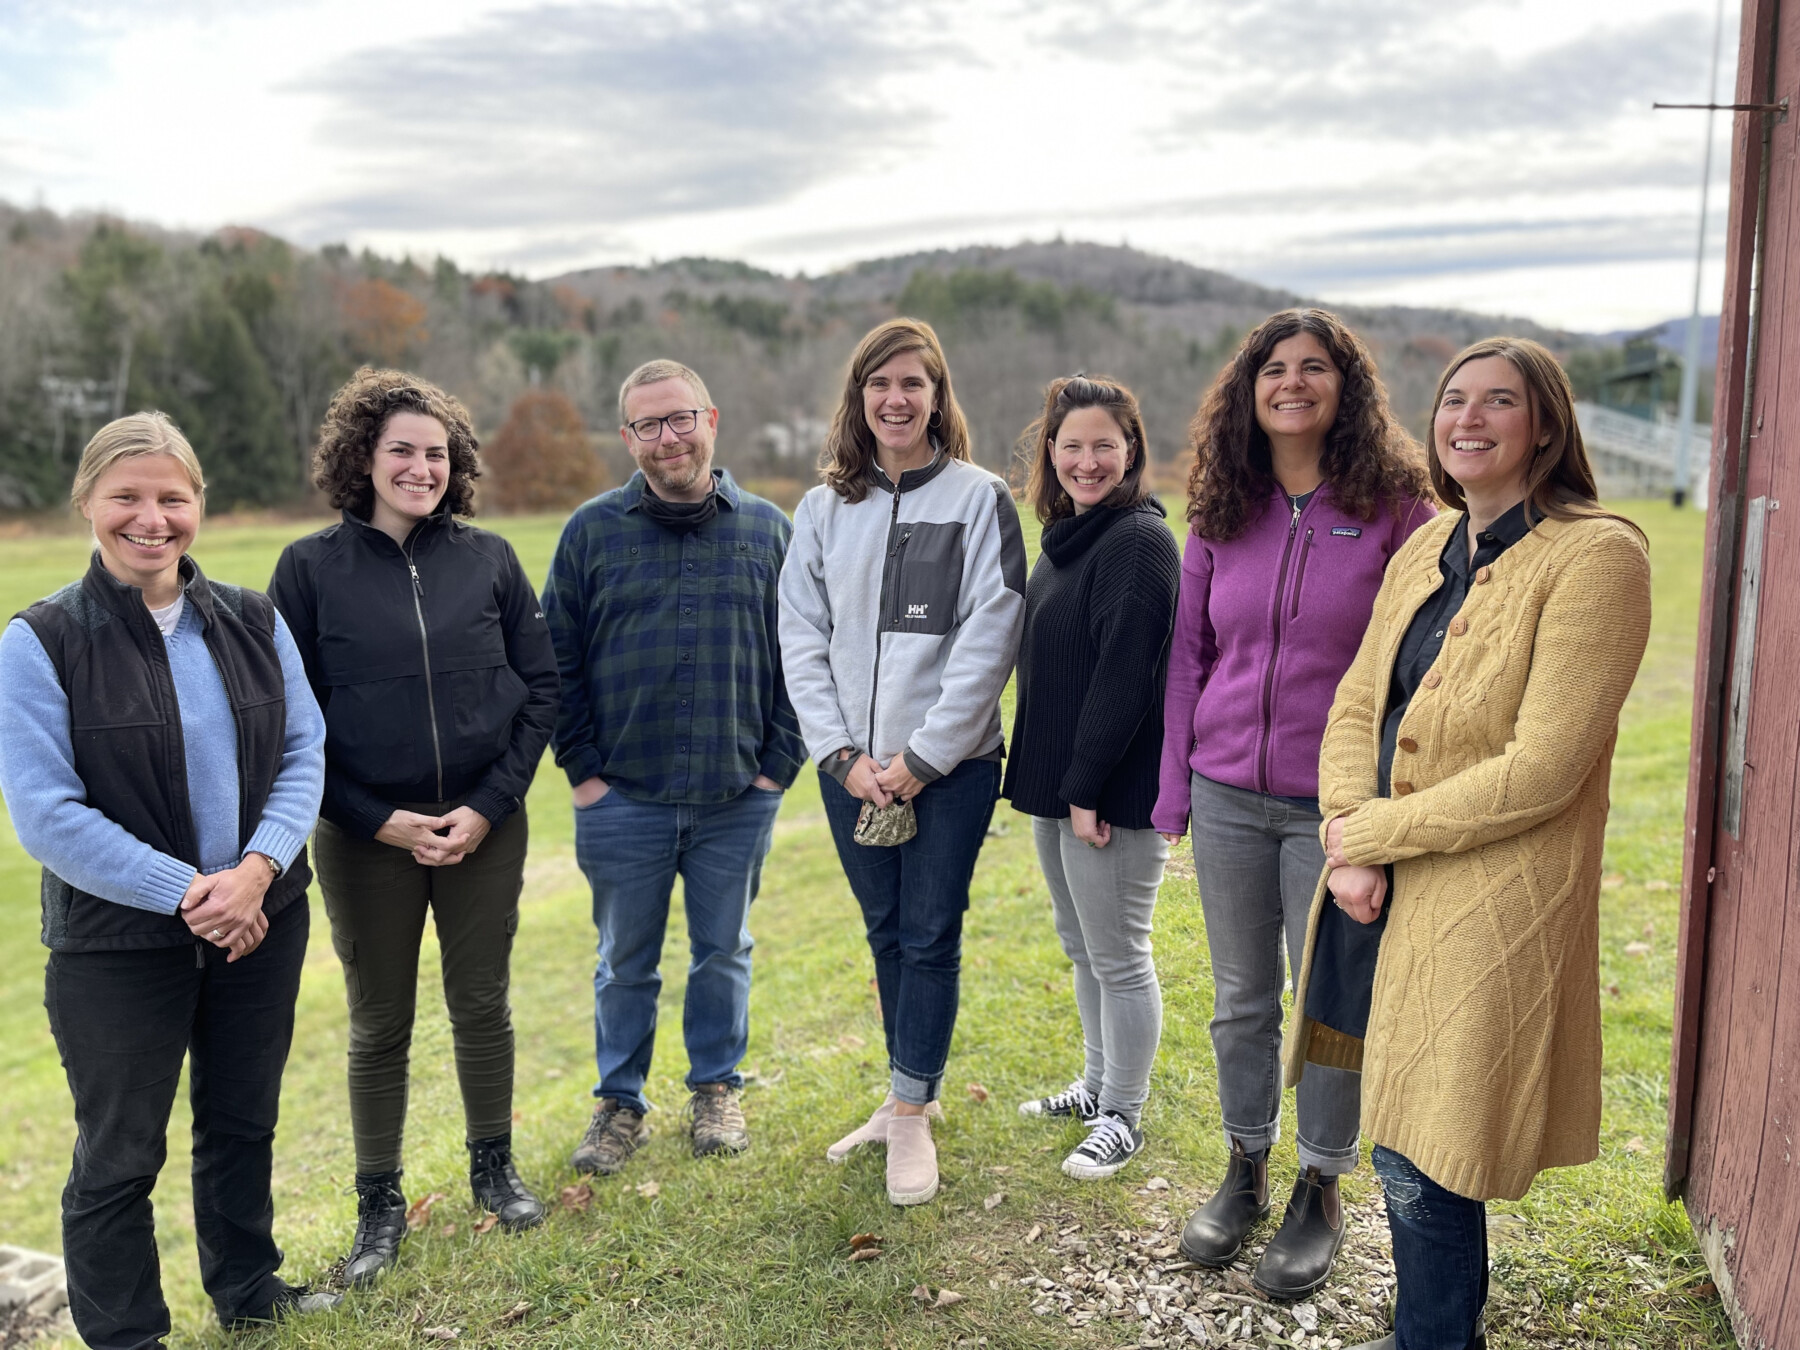 A group photo of the 2021 cohort of Rowland Fellows, showcasing the dynamic educators committed to transforming education in Vermont.